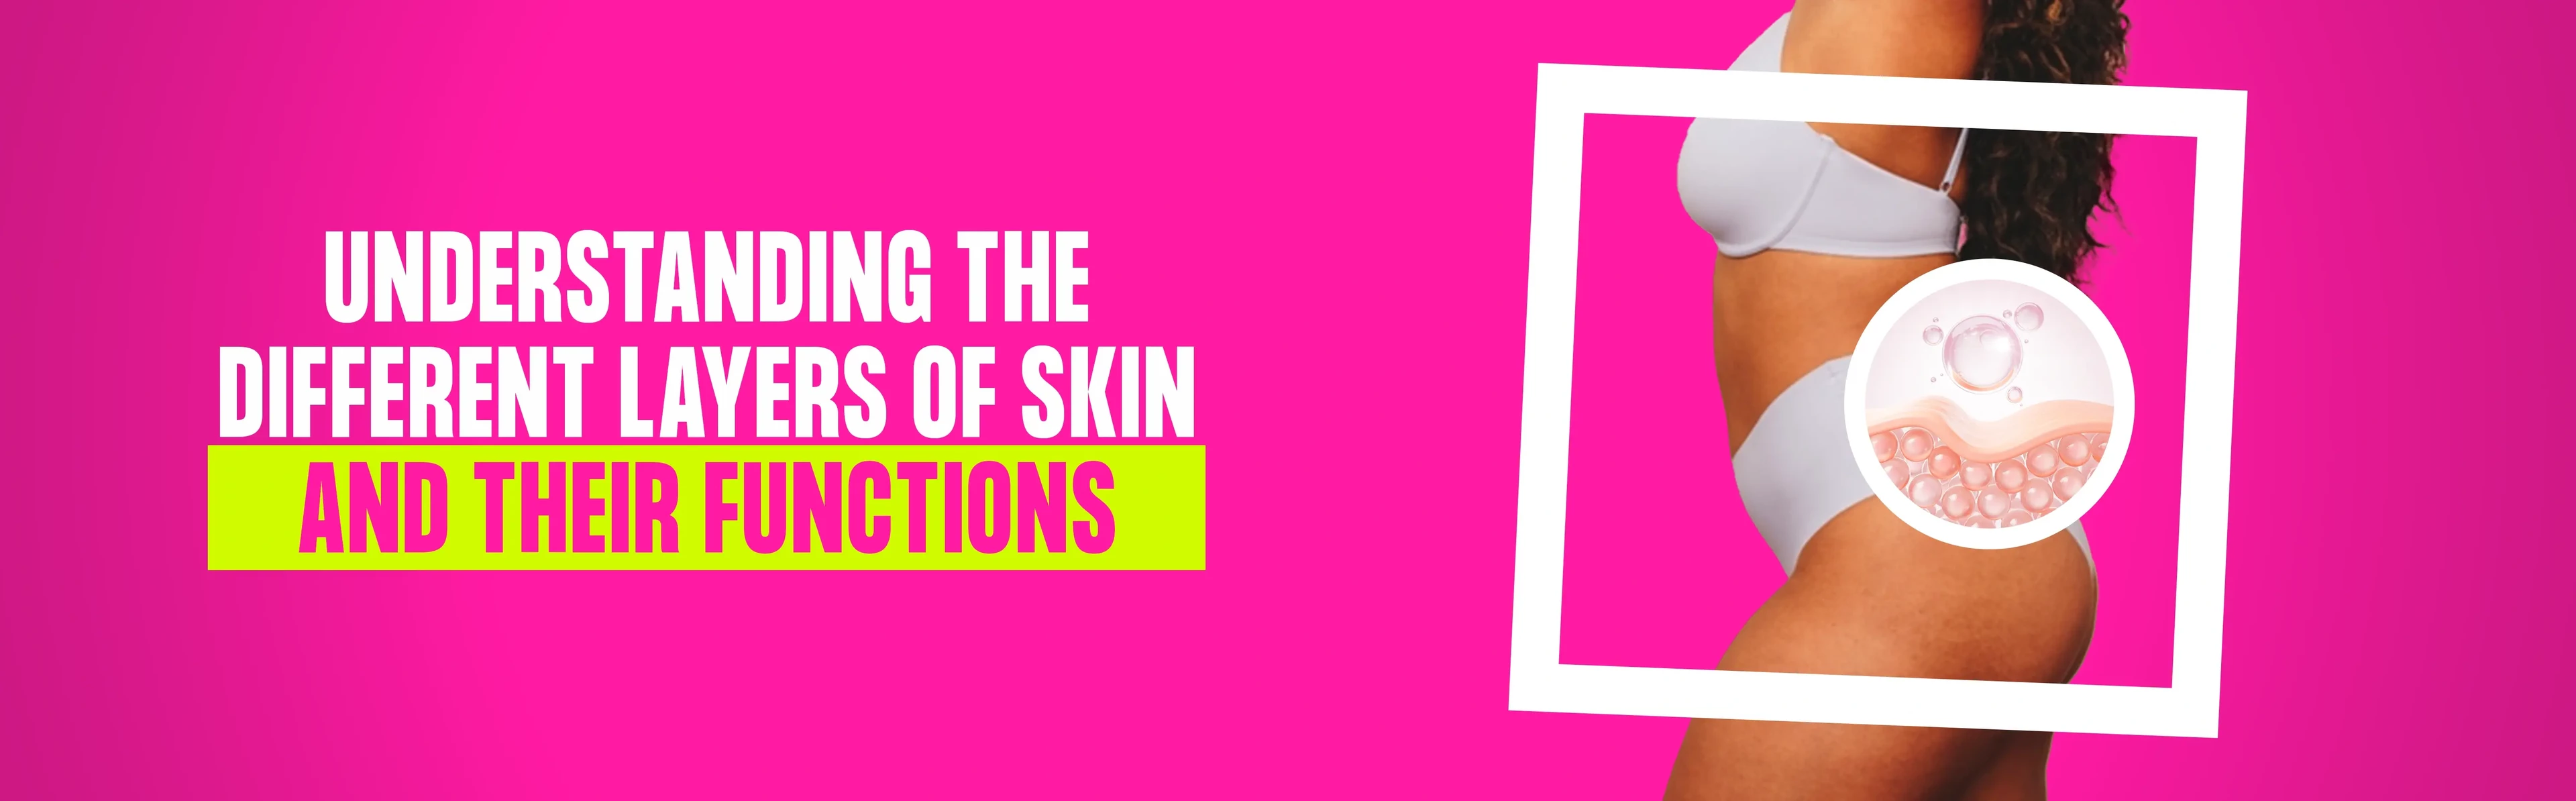 Understanding the Different Layers of Skin and Their Functions